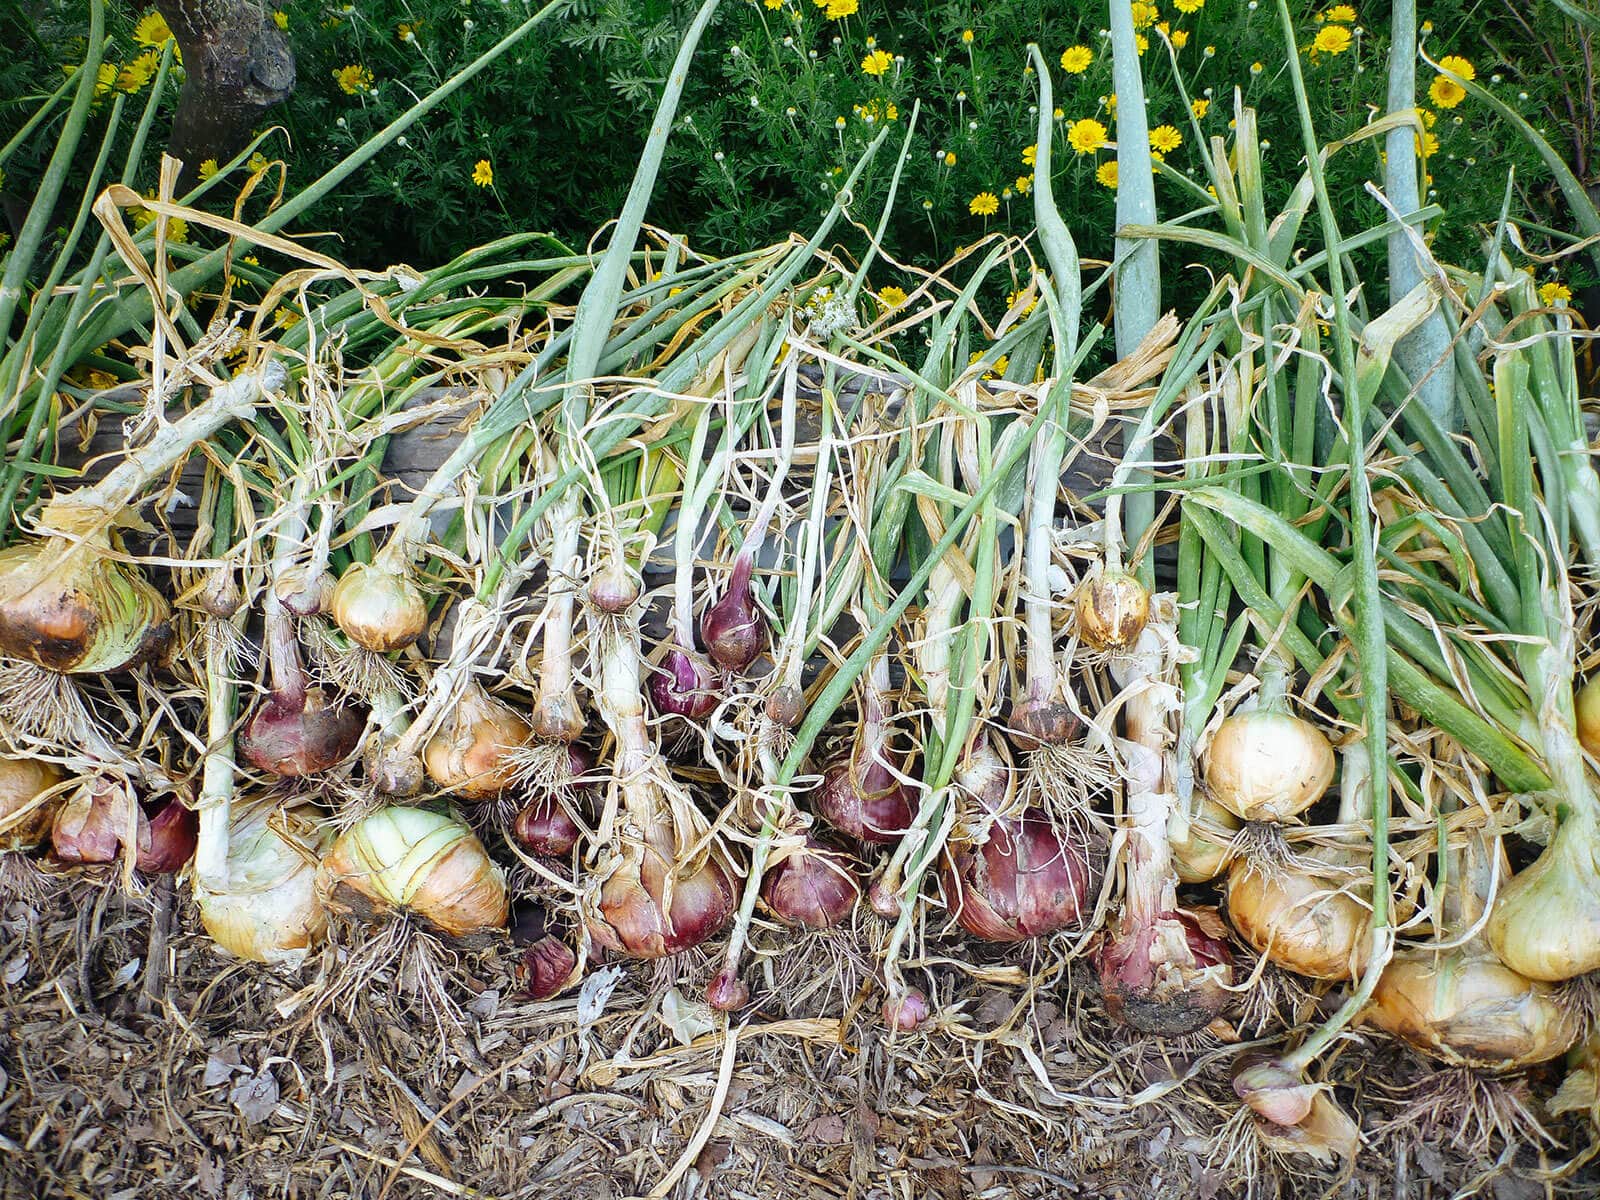 Freshly picked onions spread out on the ground